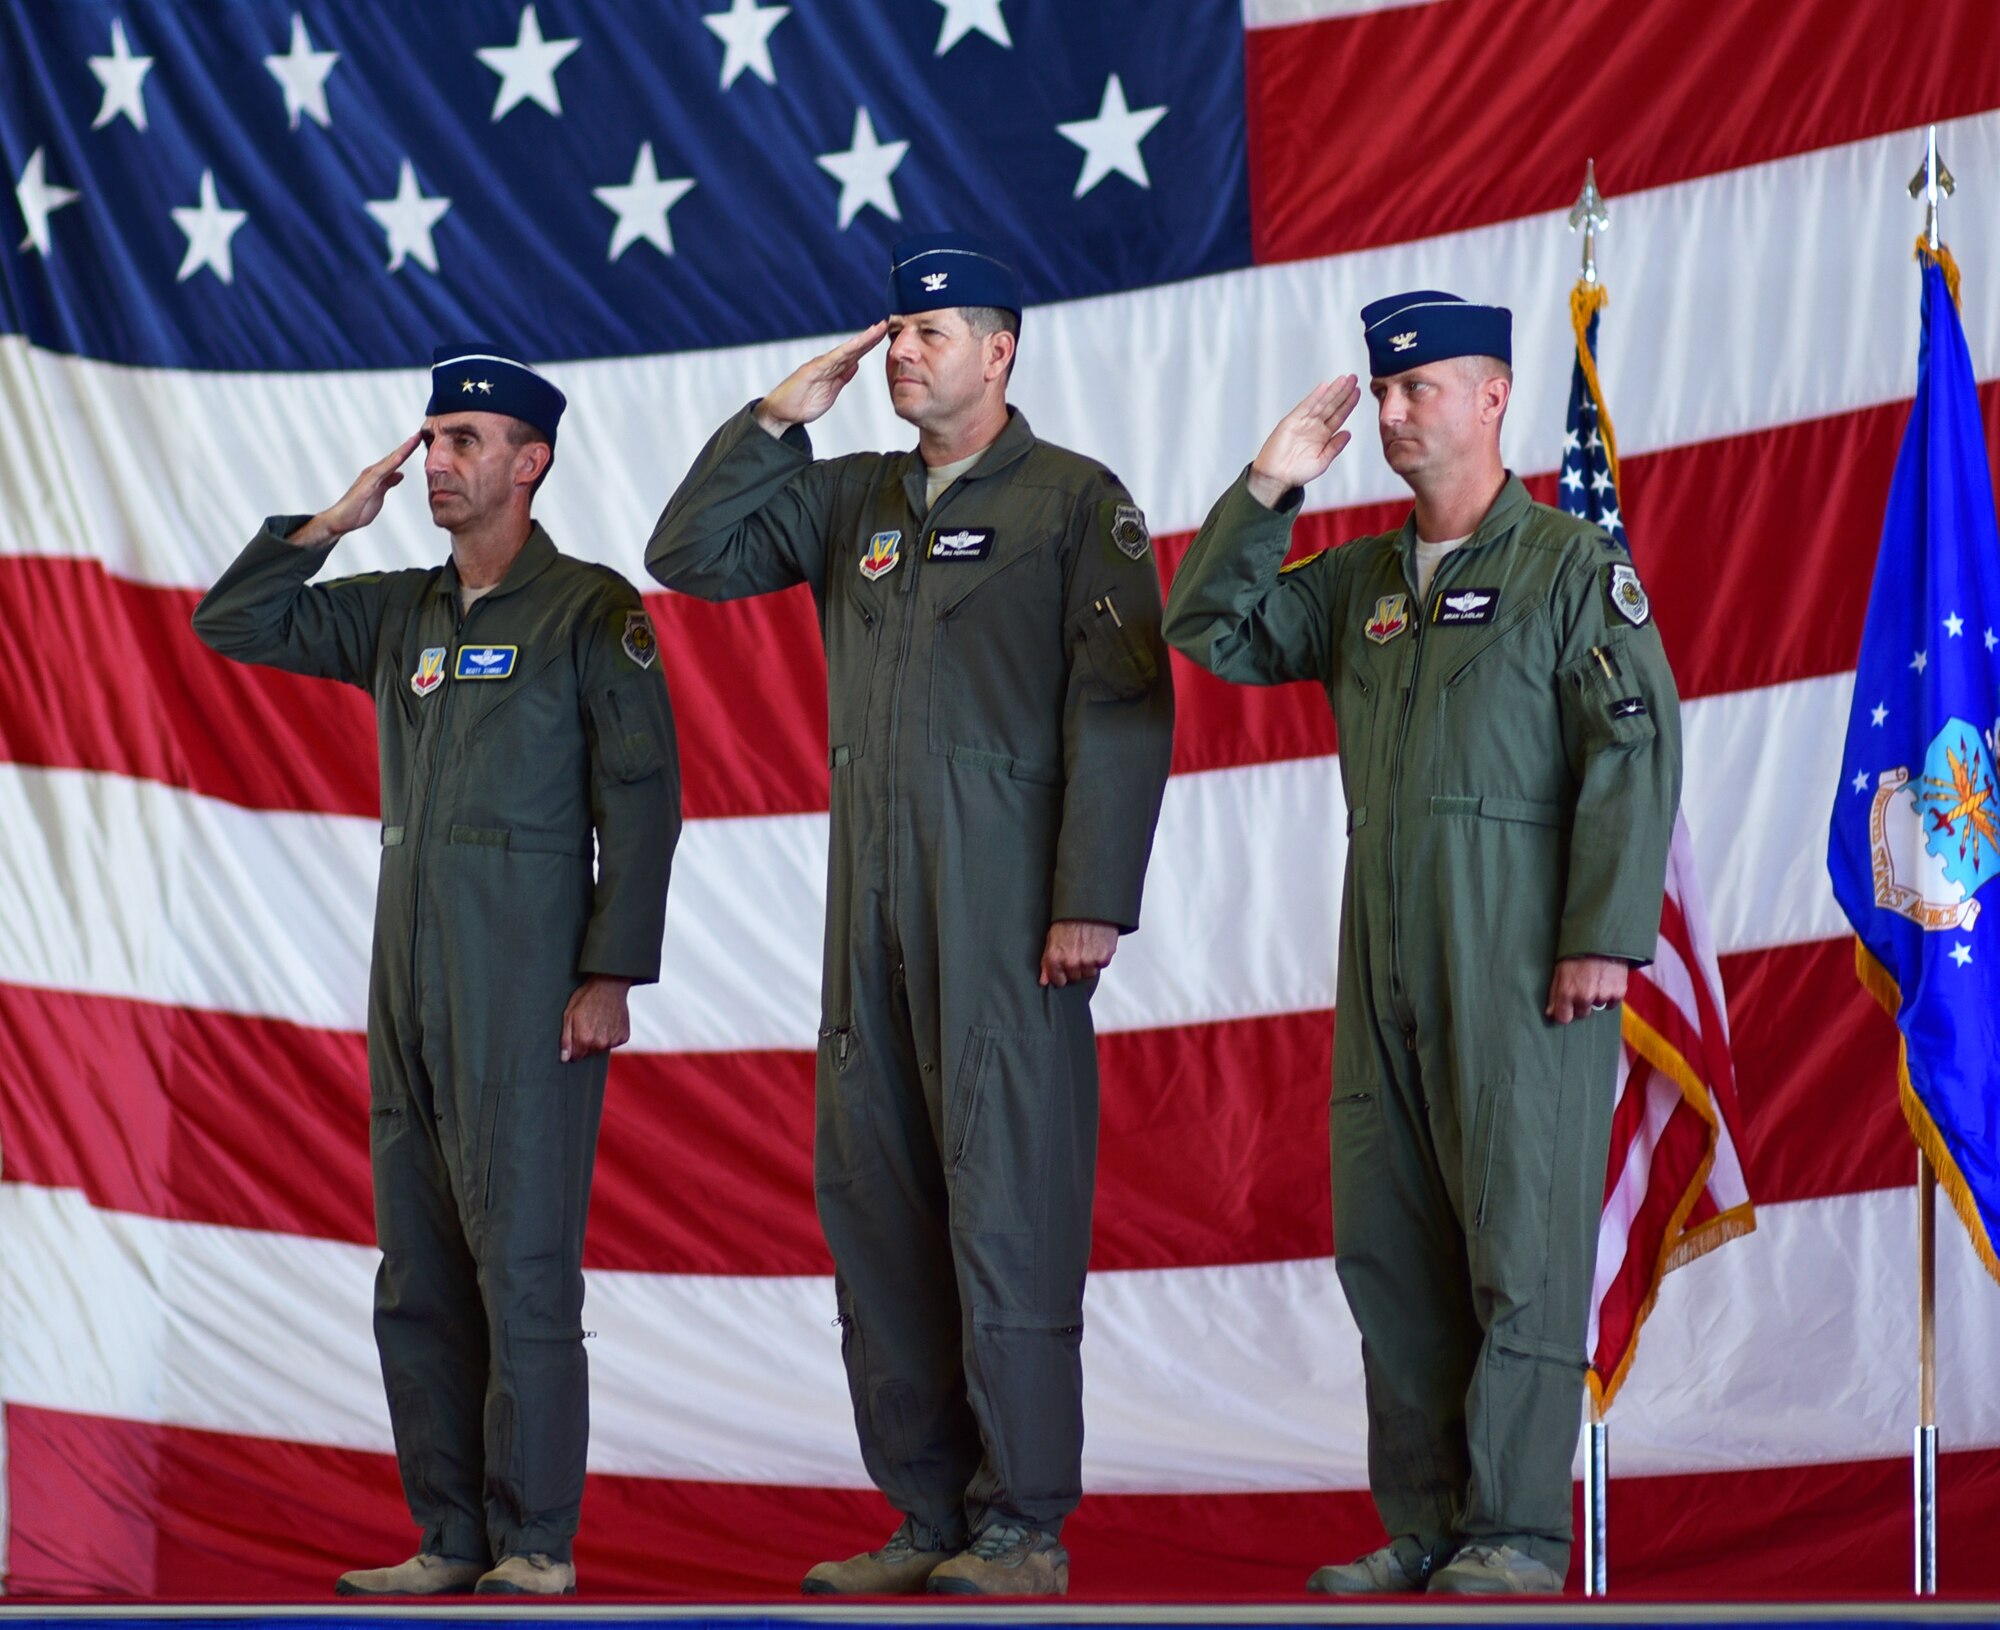 Commanders salute during wing change of command ceremony.